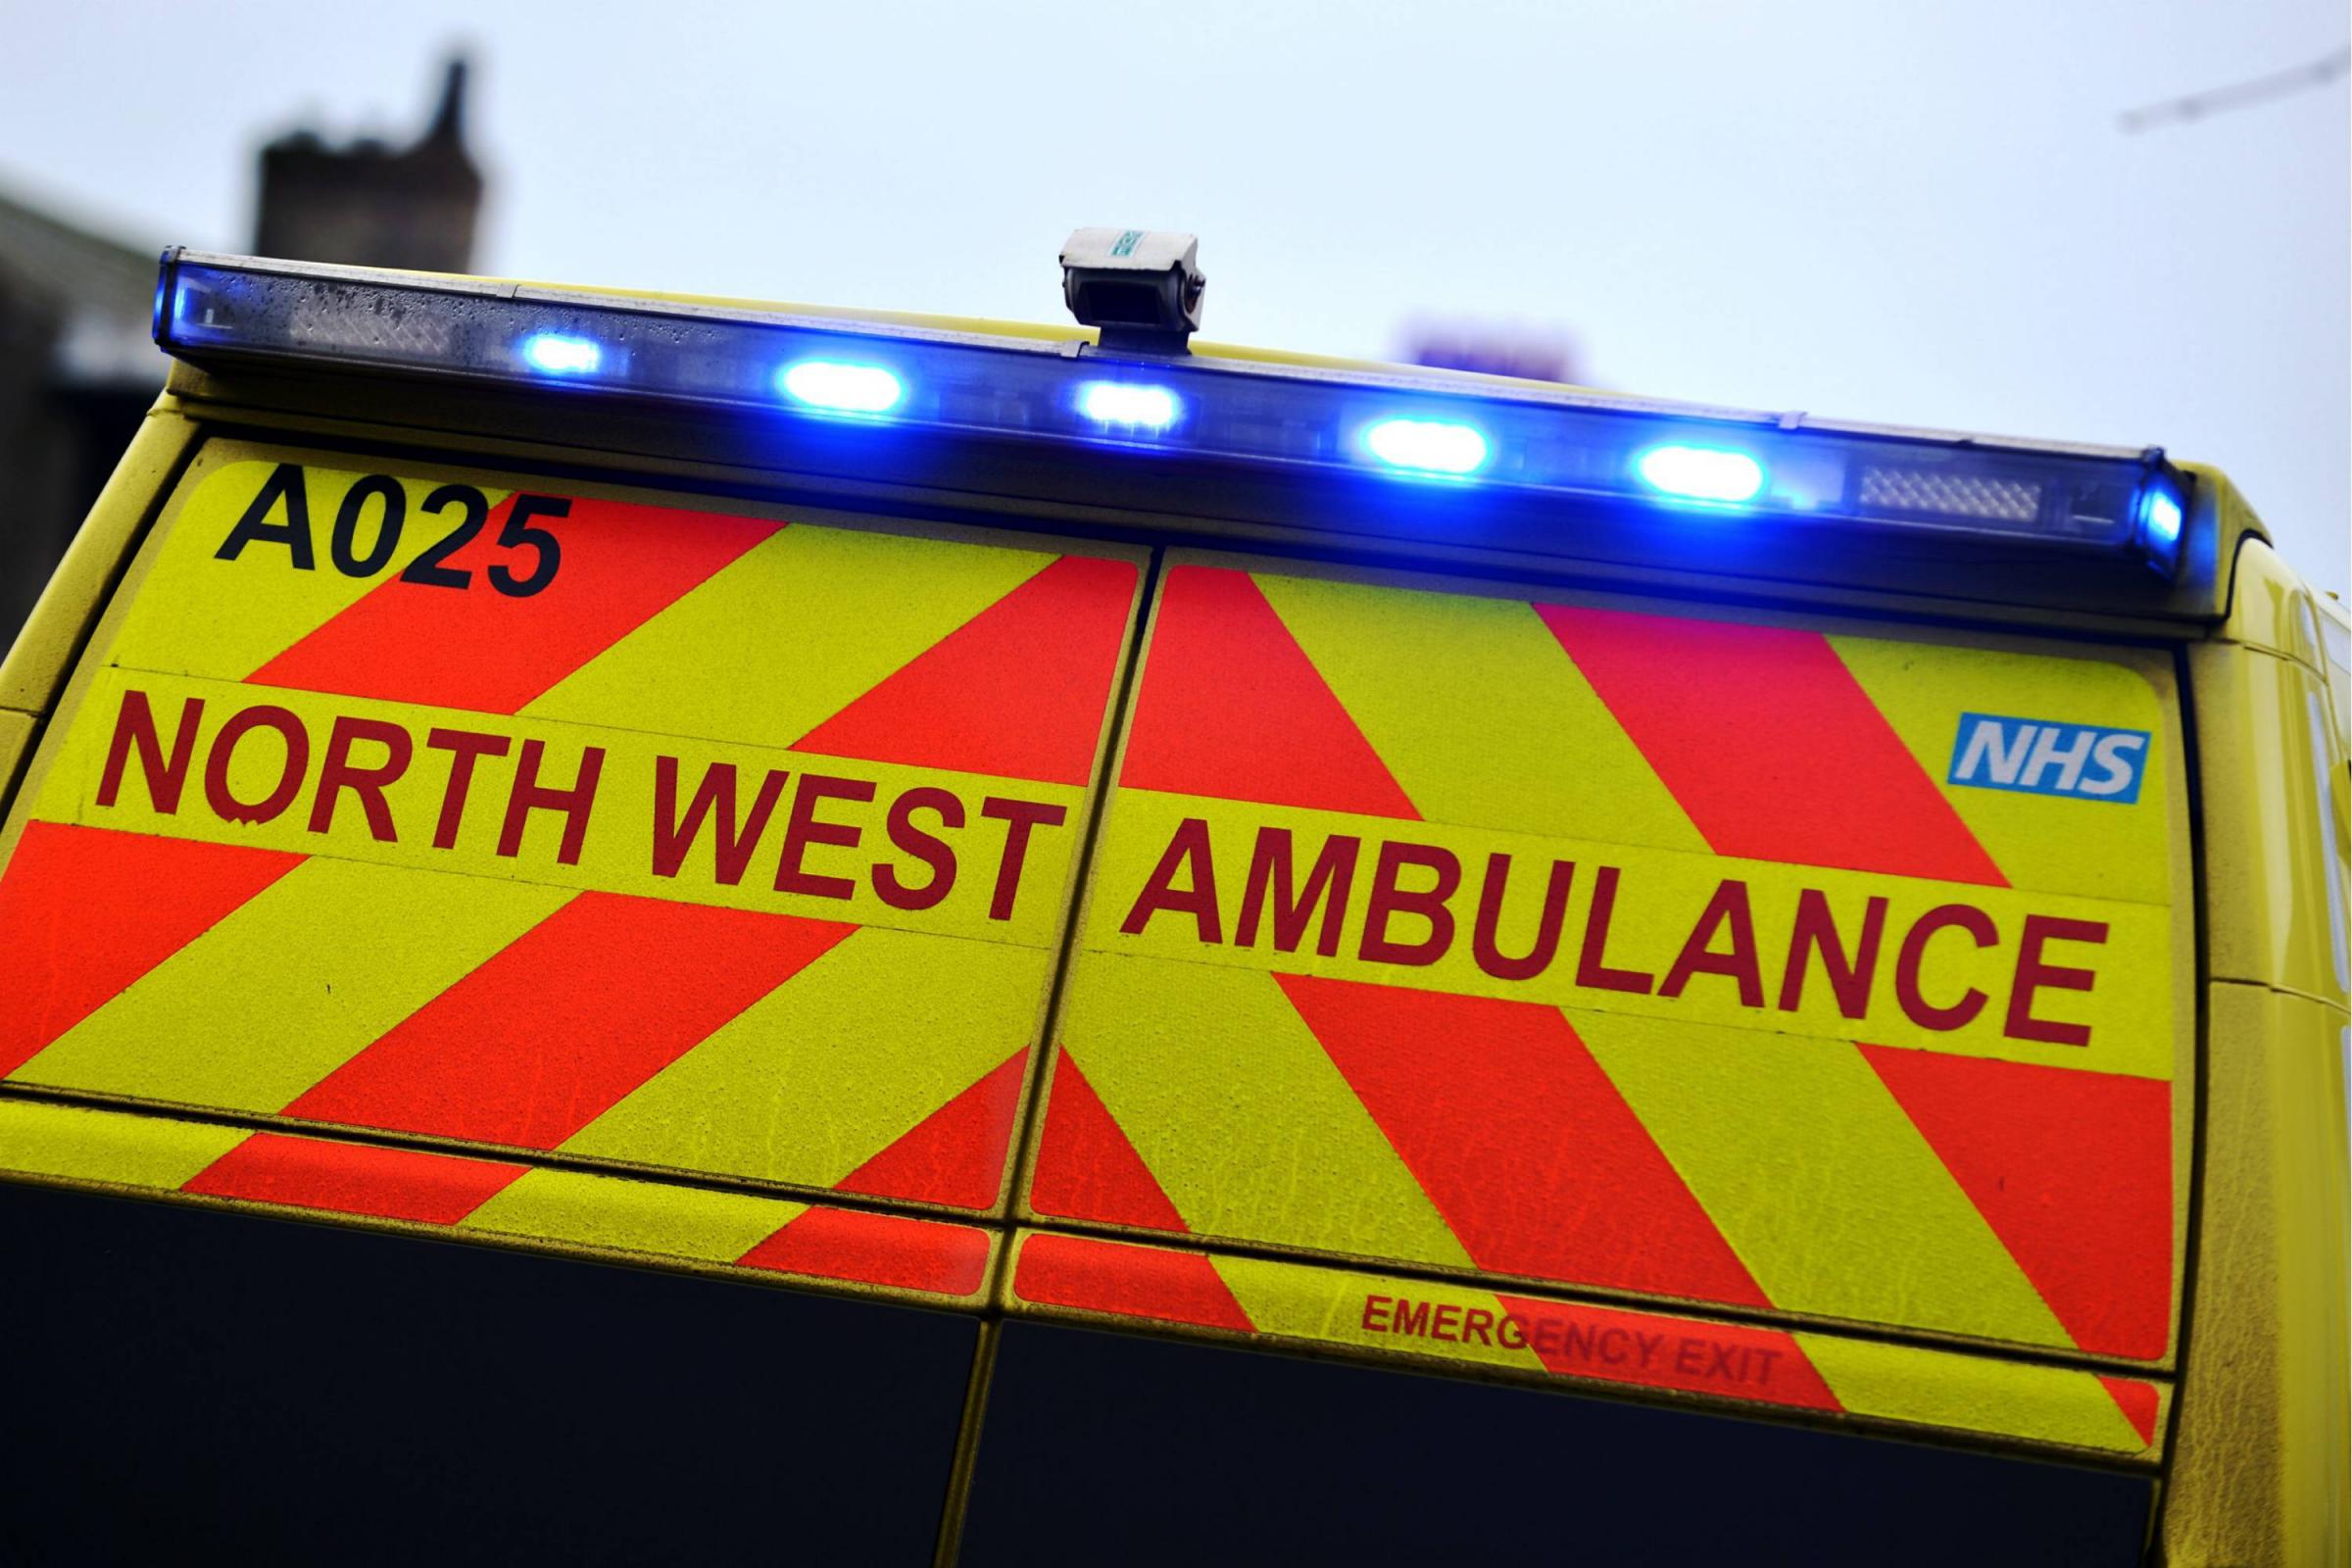 COMMENT: Reassured that North West Ambulance Service is doing its best